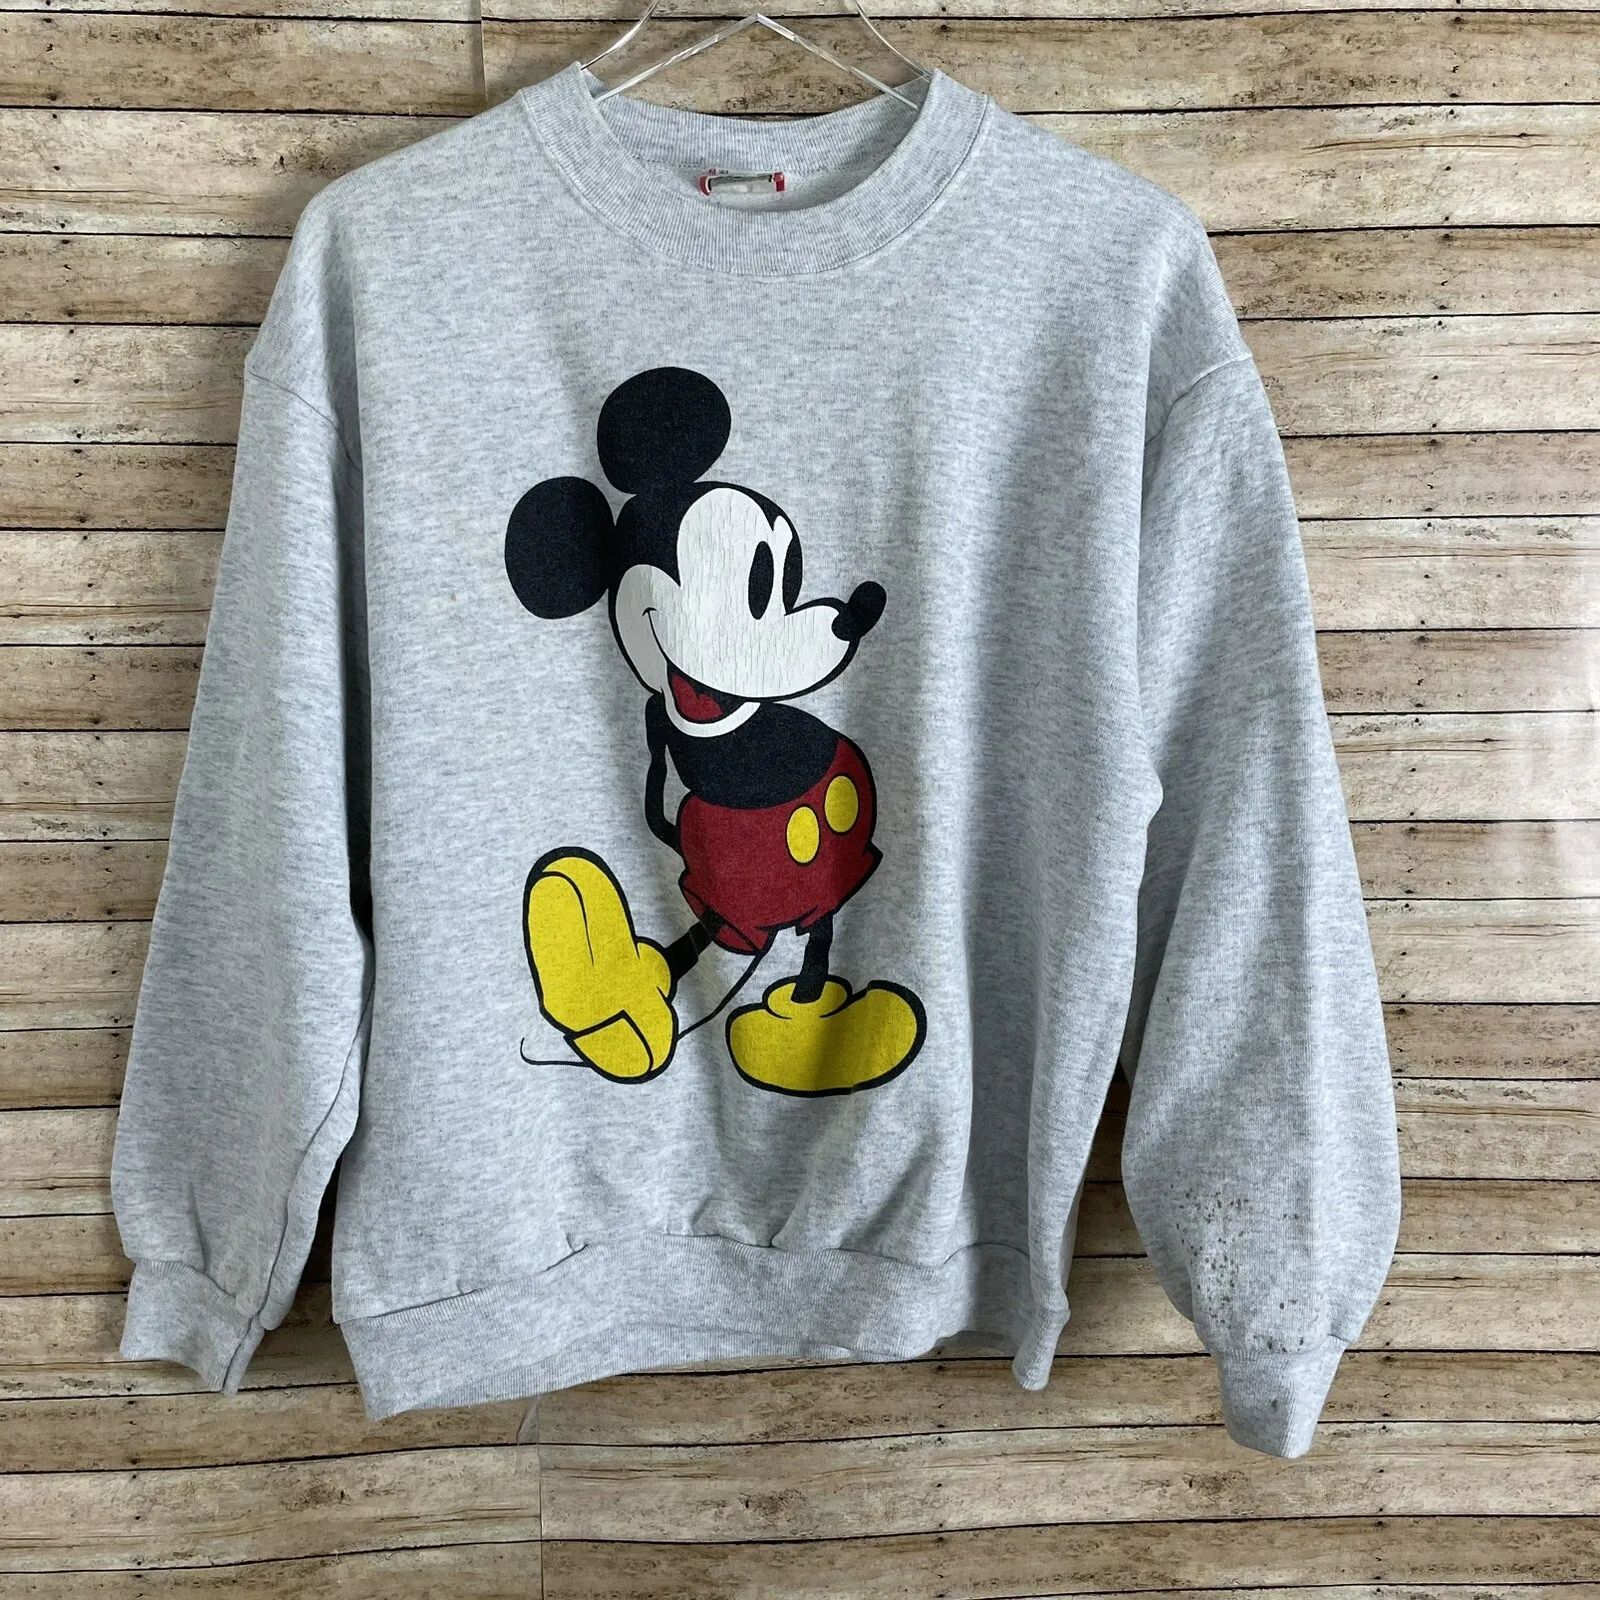 Vintage 1990s Disney Mickey Mouse Graphic Sweatshirt Size L Crewneck Made In USA | eBay US